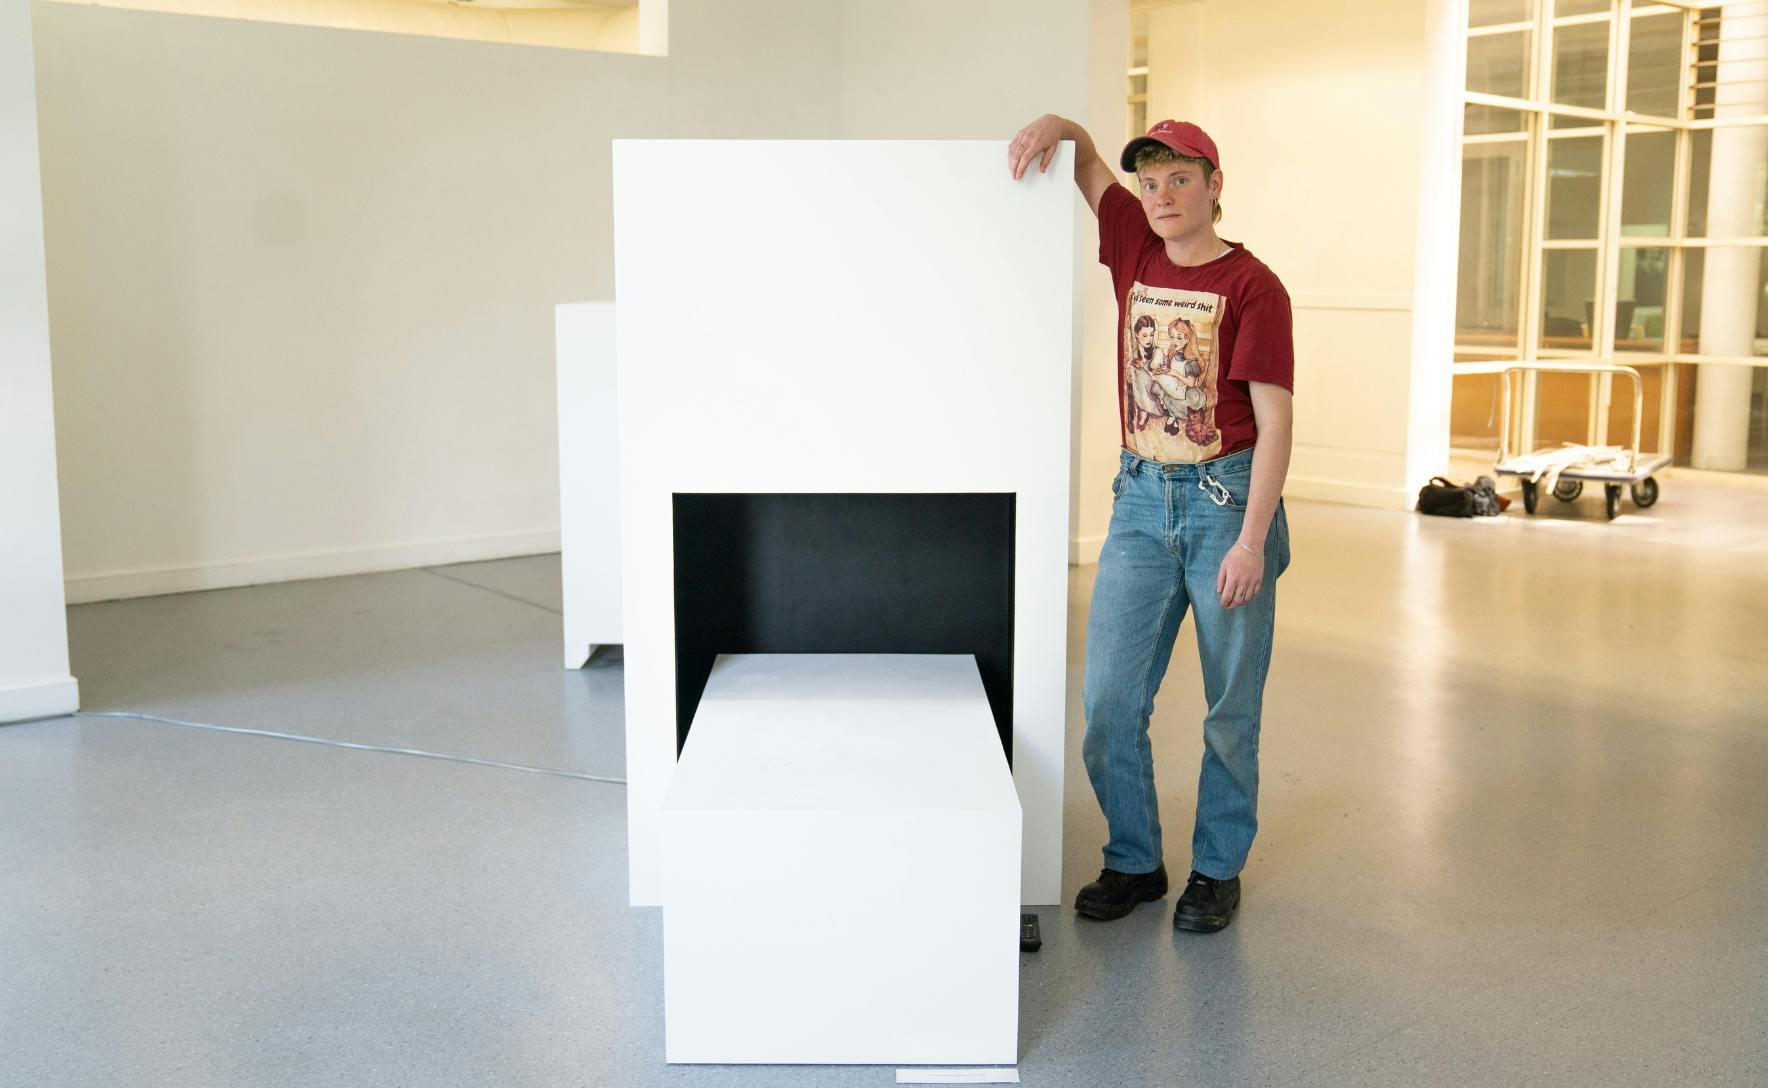 a person in a red shirt is standing with their arm resting on a white box and look away from the camera